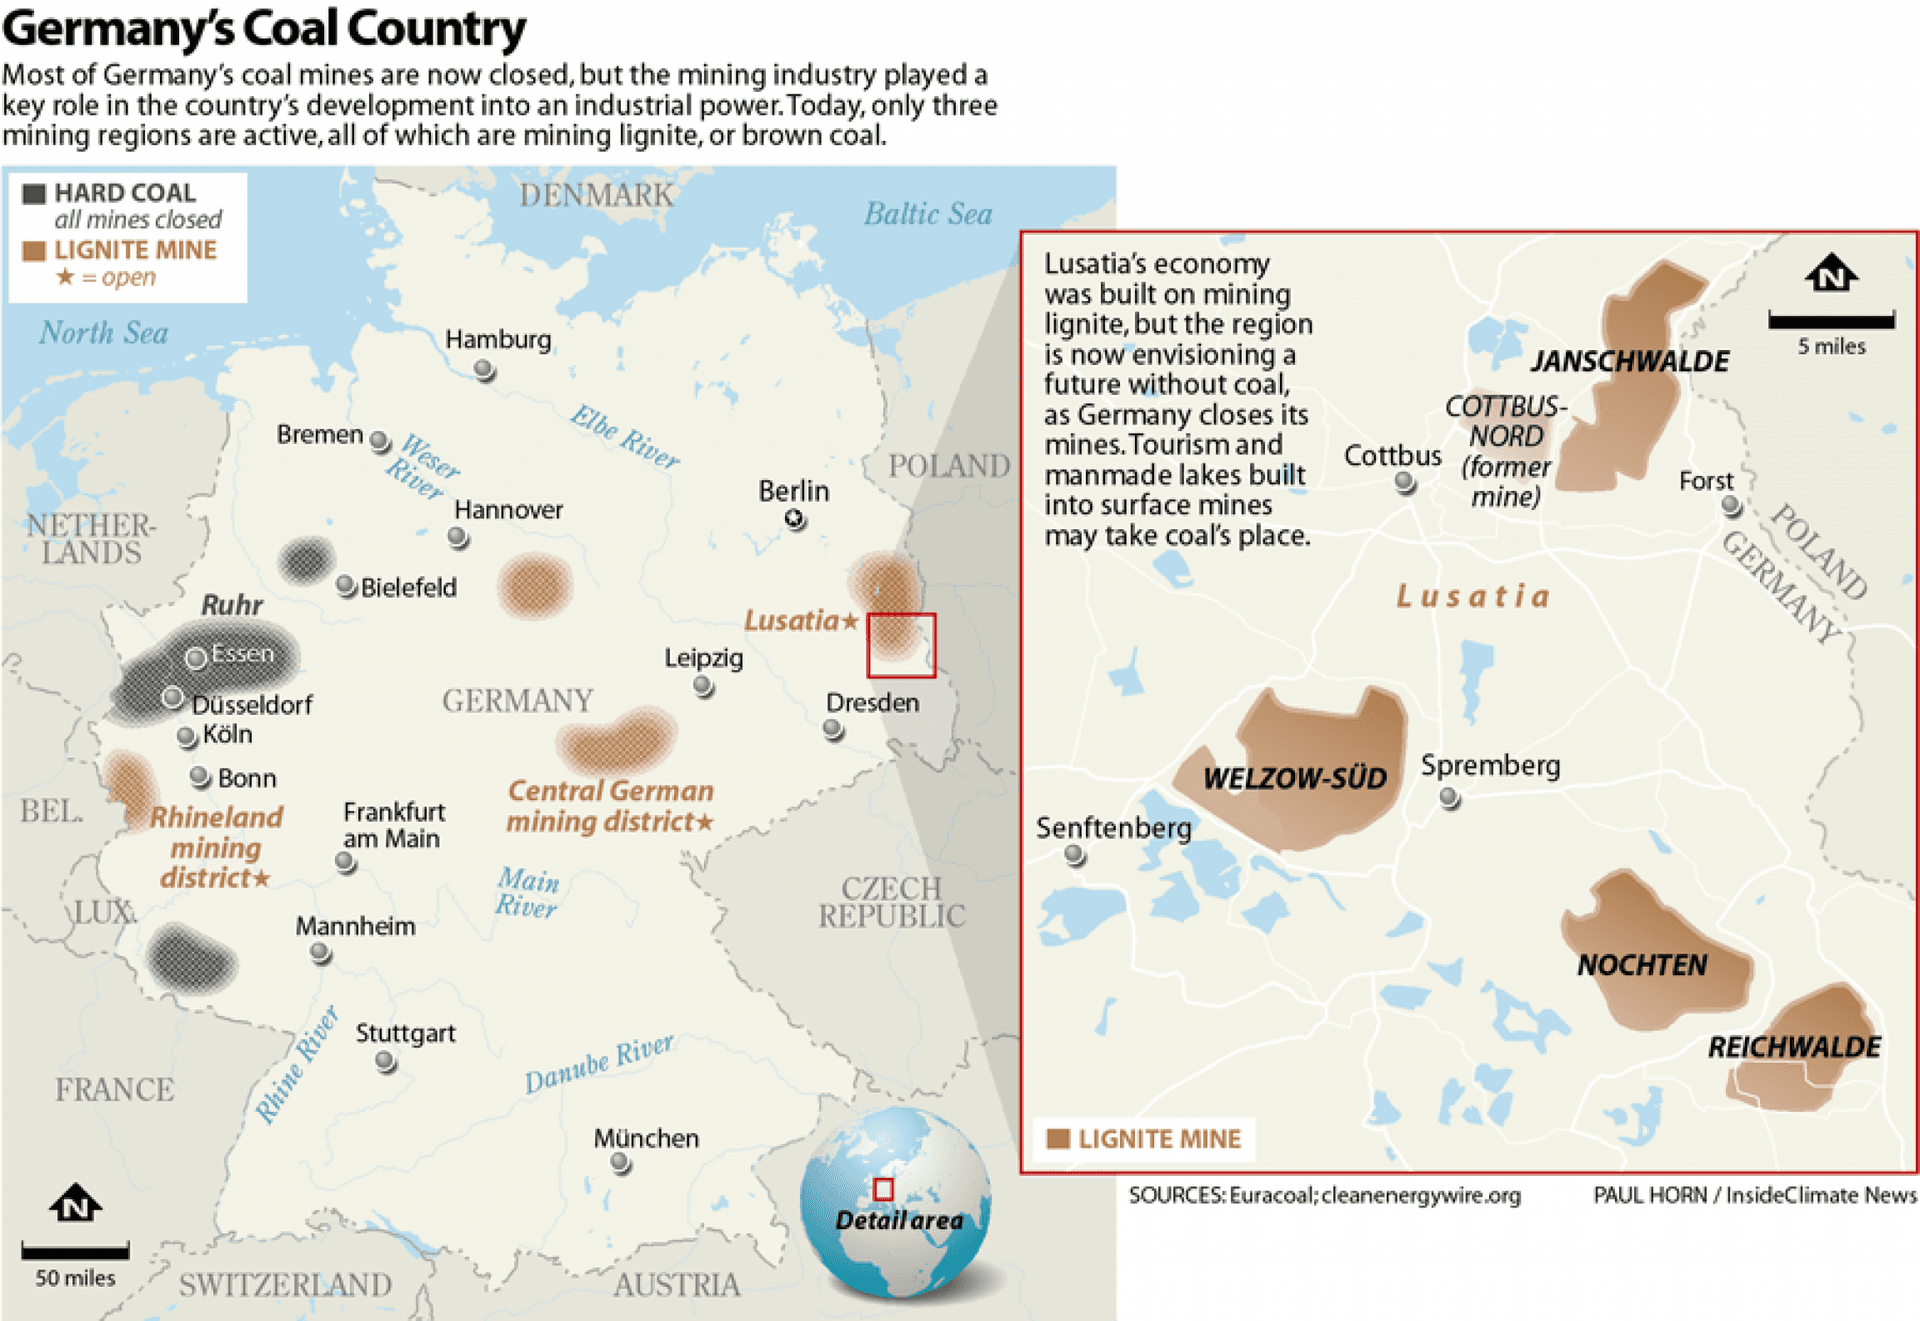 Germany's coal country